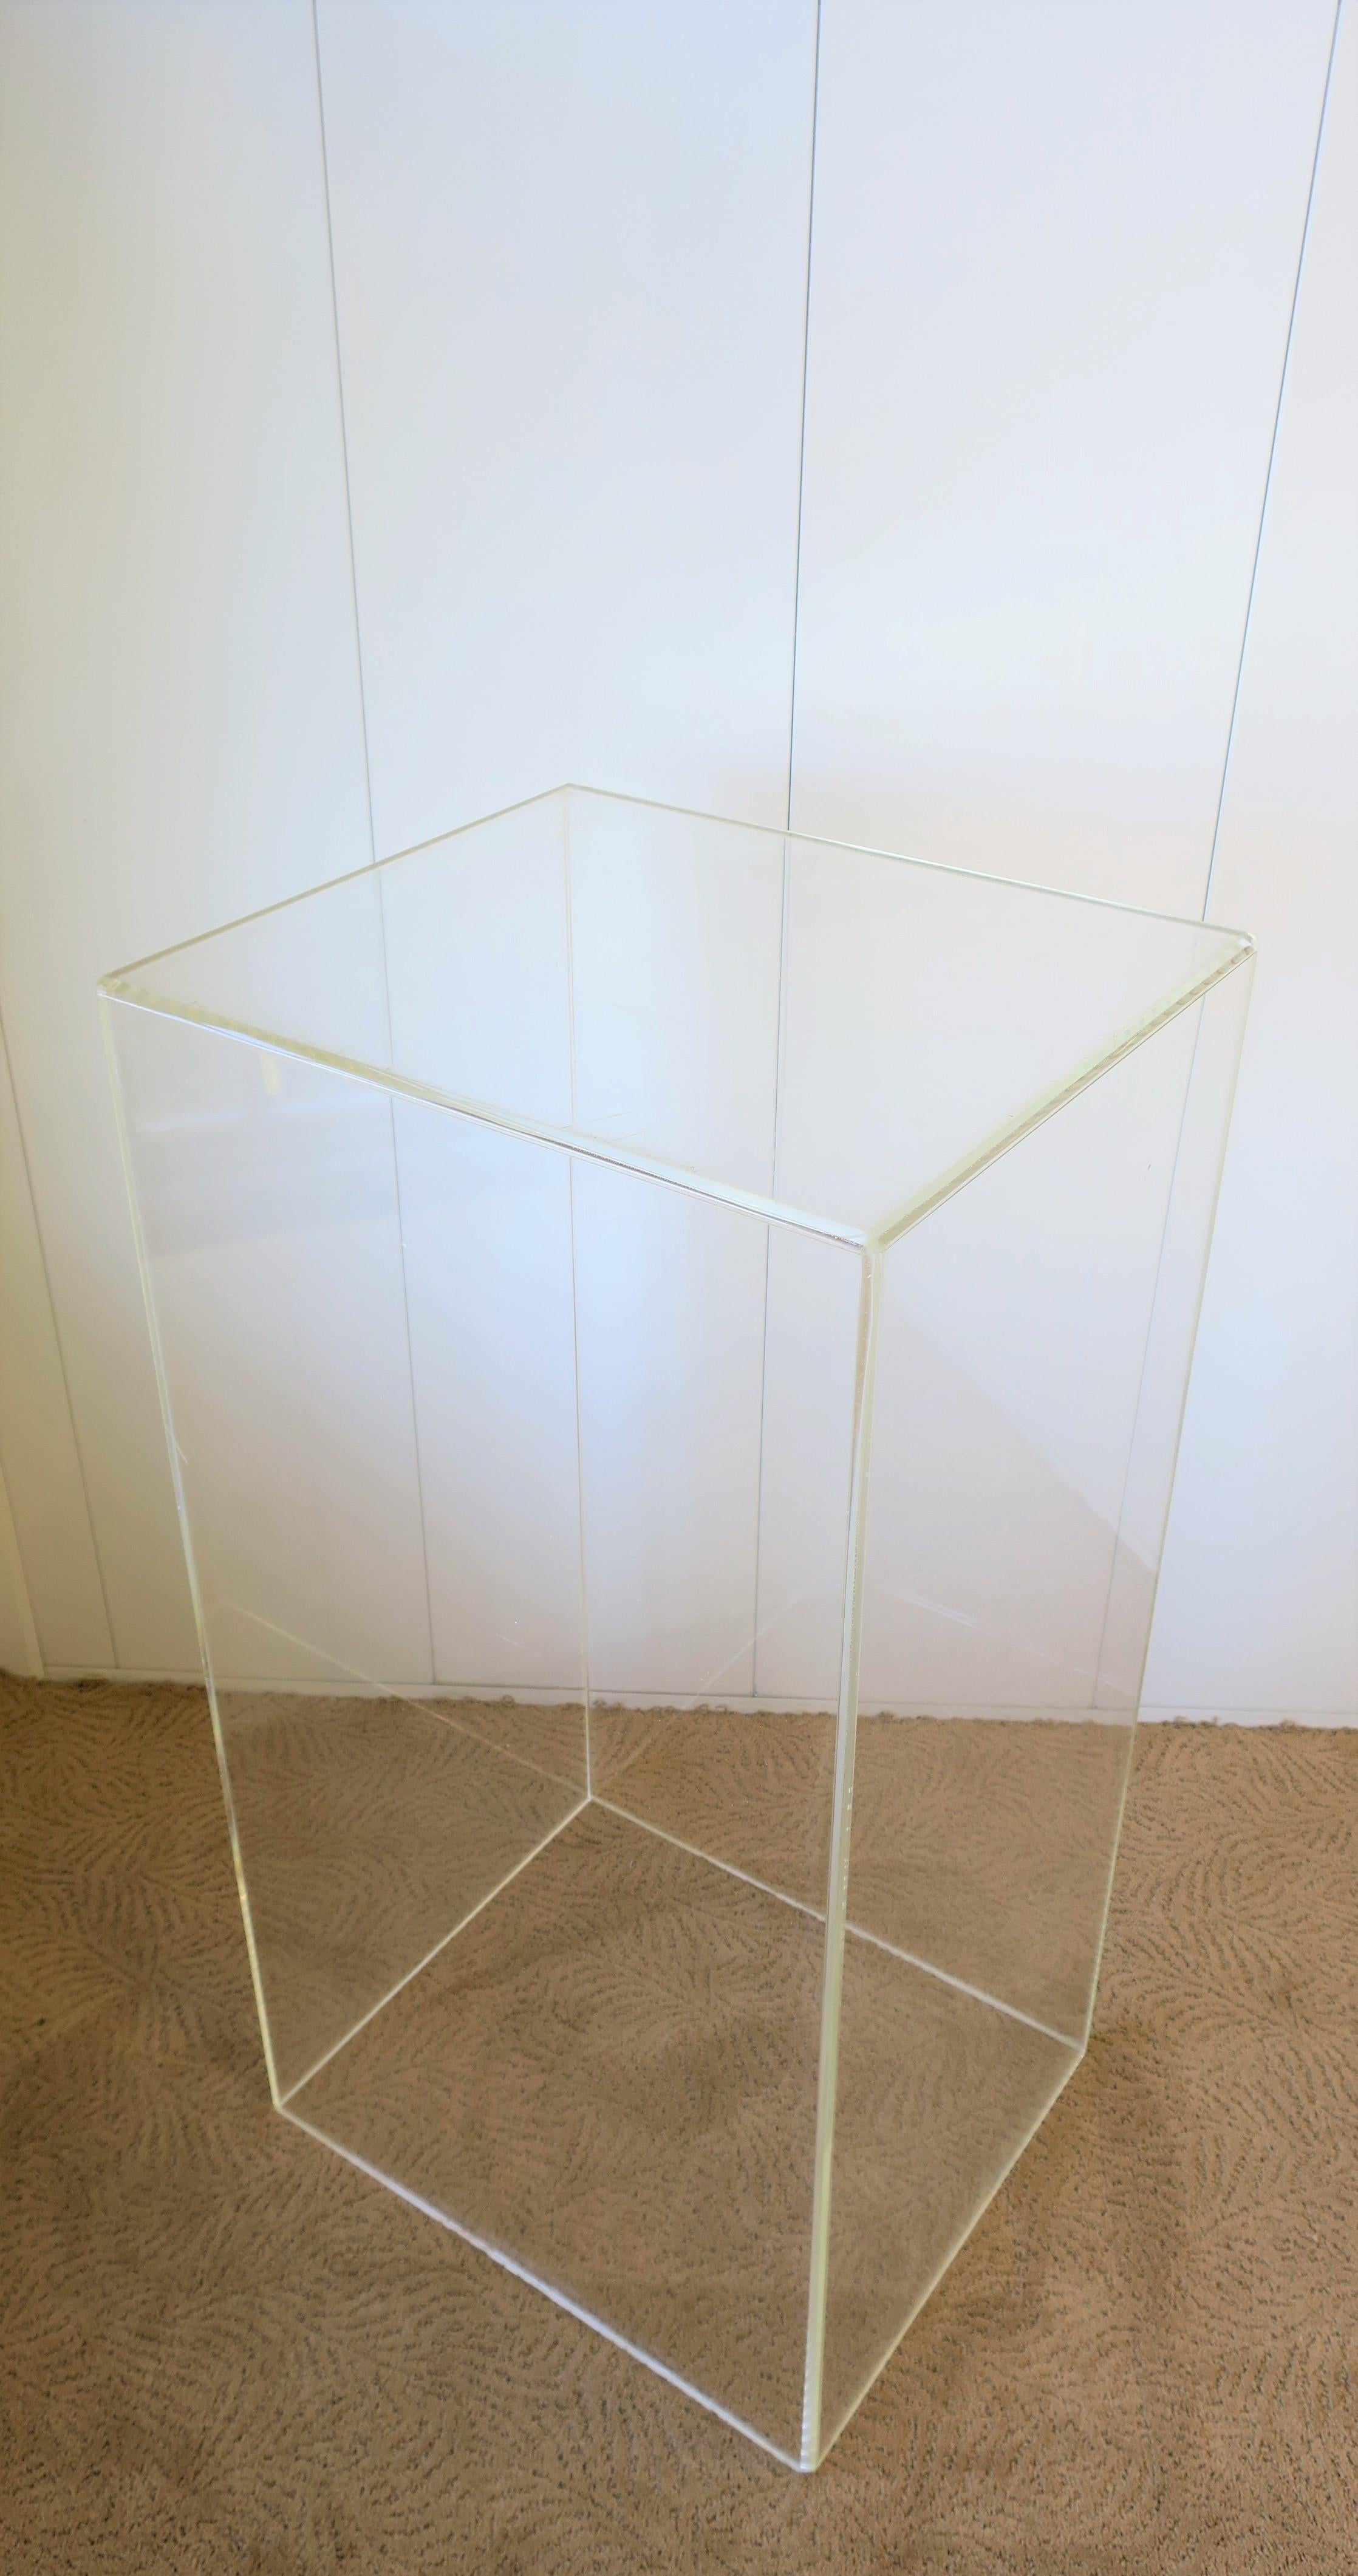 A substantial 36 inch tall rectangular Lucite/acrylic Modern style column pedestal stand display piece. Can be used to display items such as art, sculpture, jewelry, plant, etc.  

Measurements include: 9